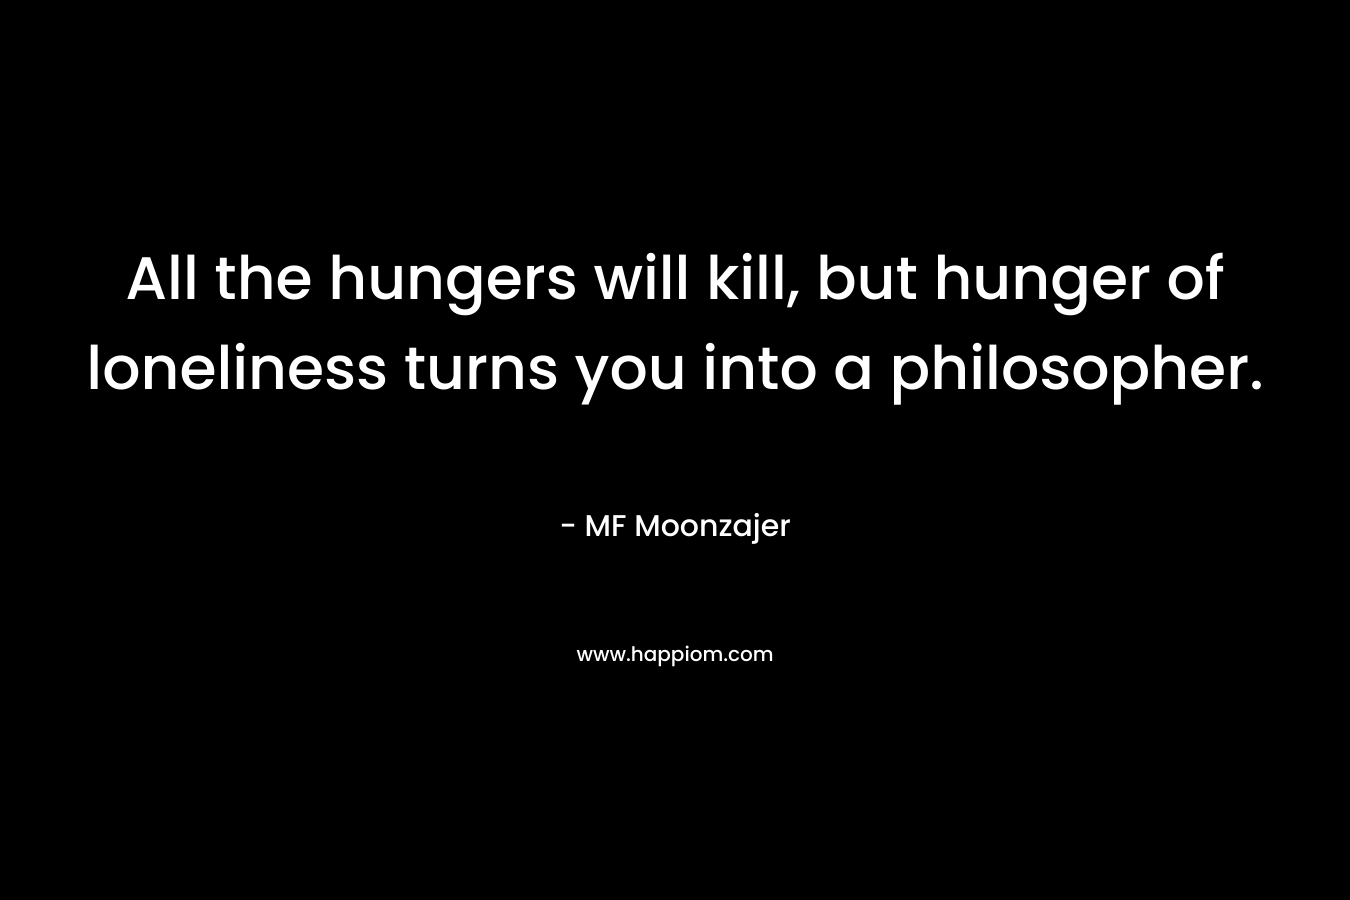 All the hungers will kill, but hunger of loneliness turns you into a philosopher. – MF Moonzajer